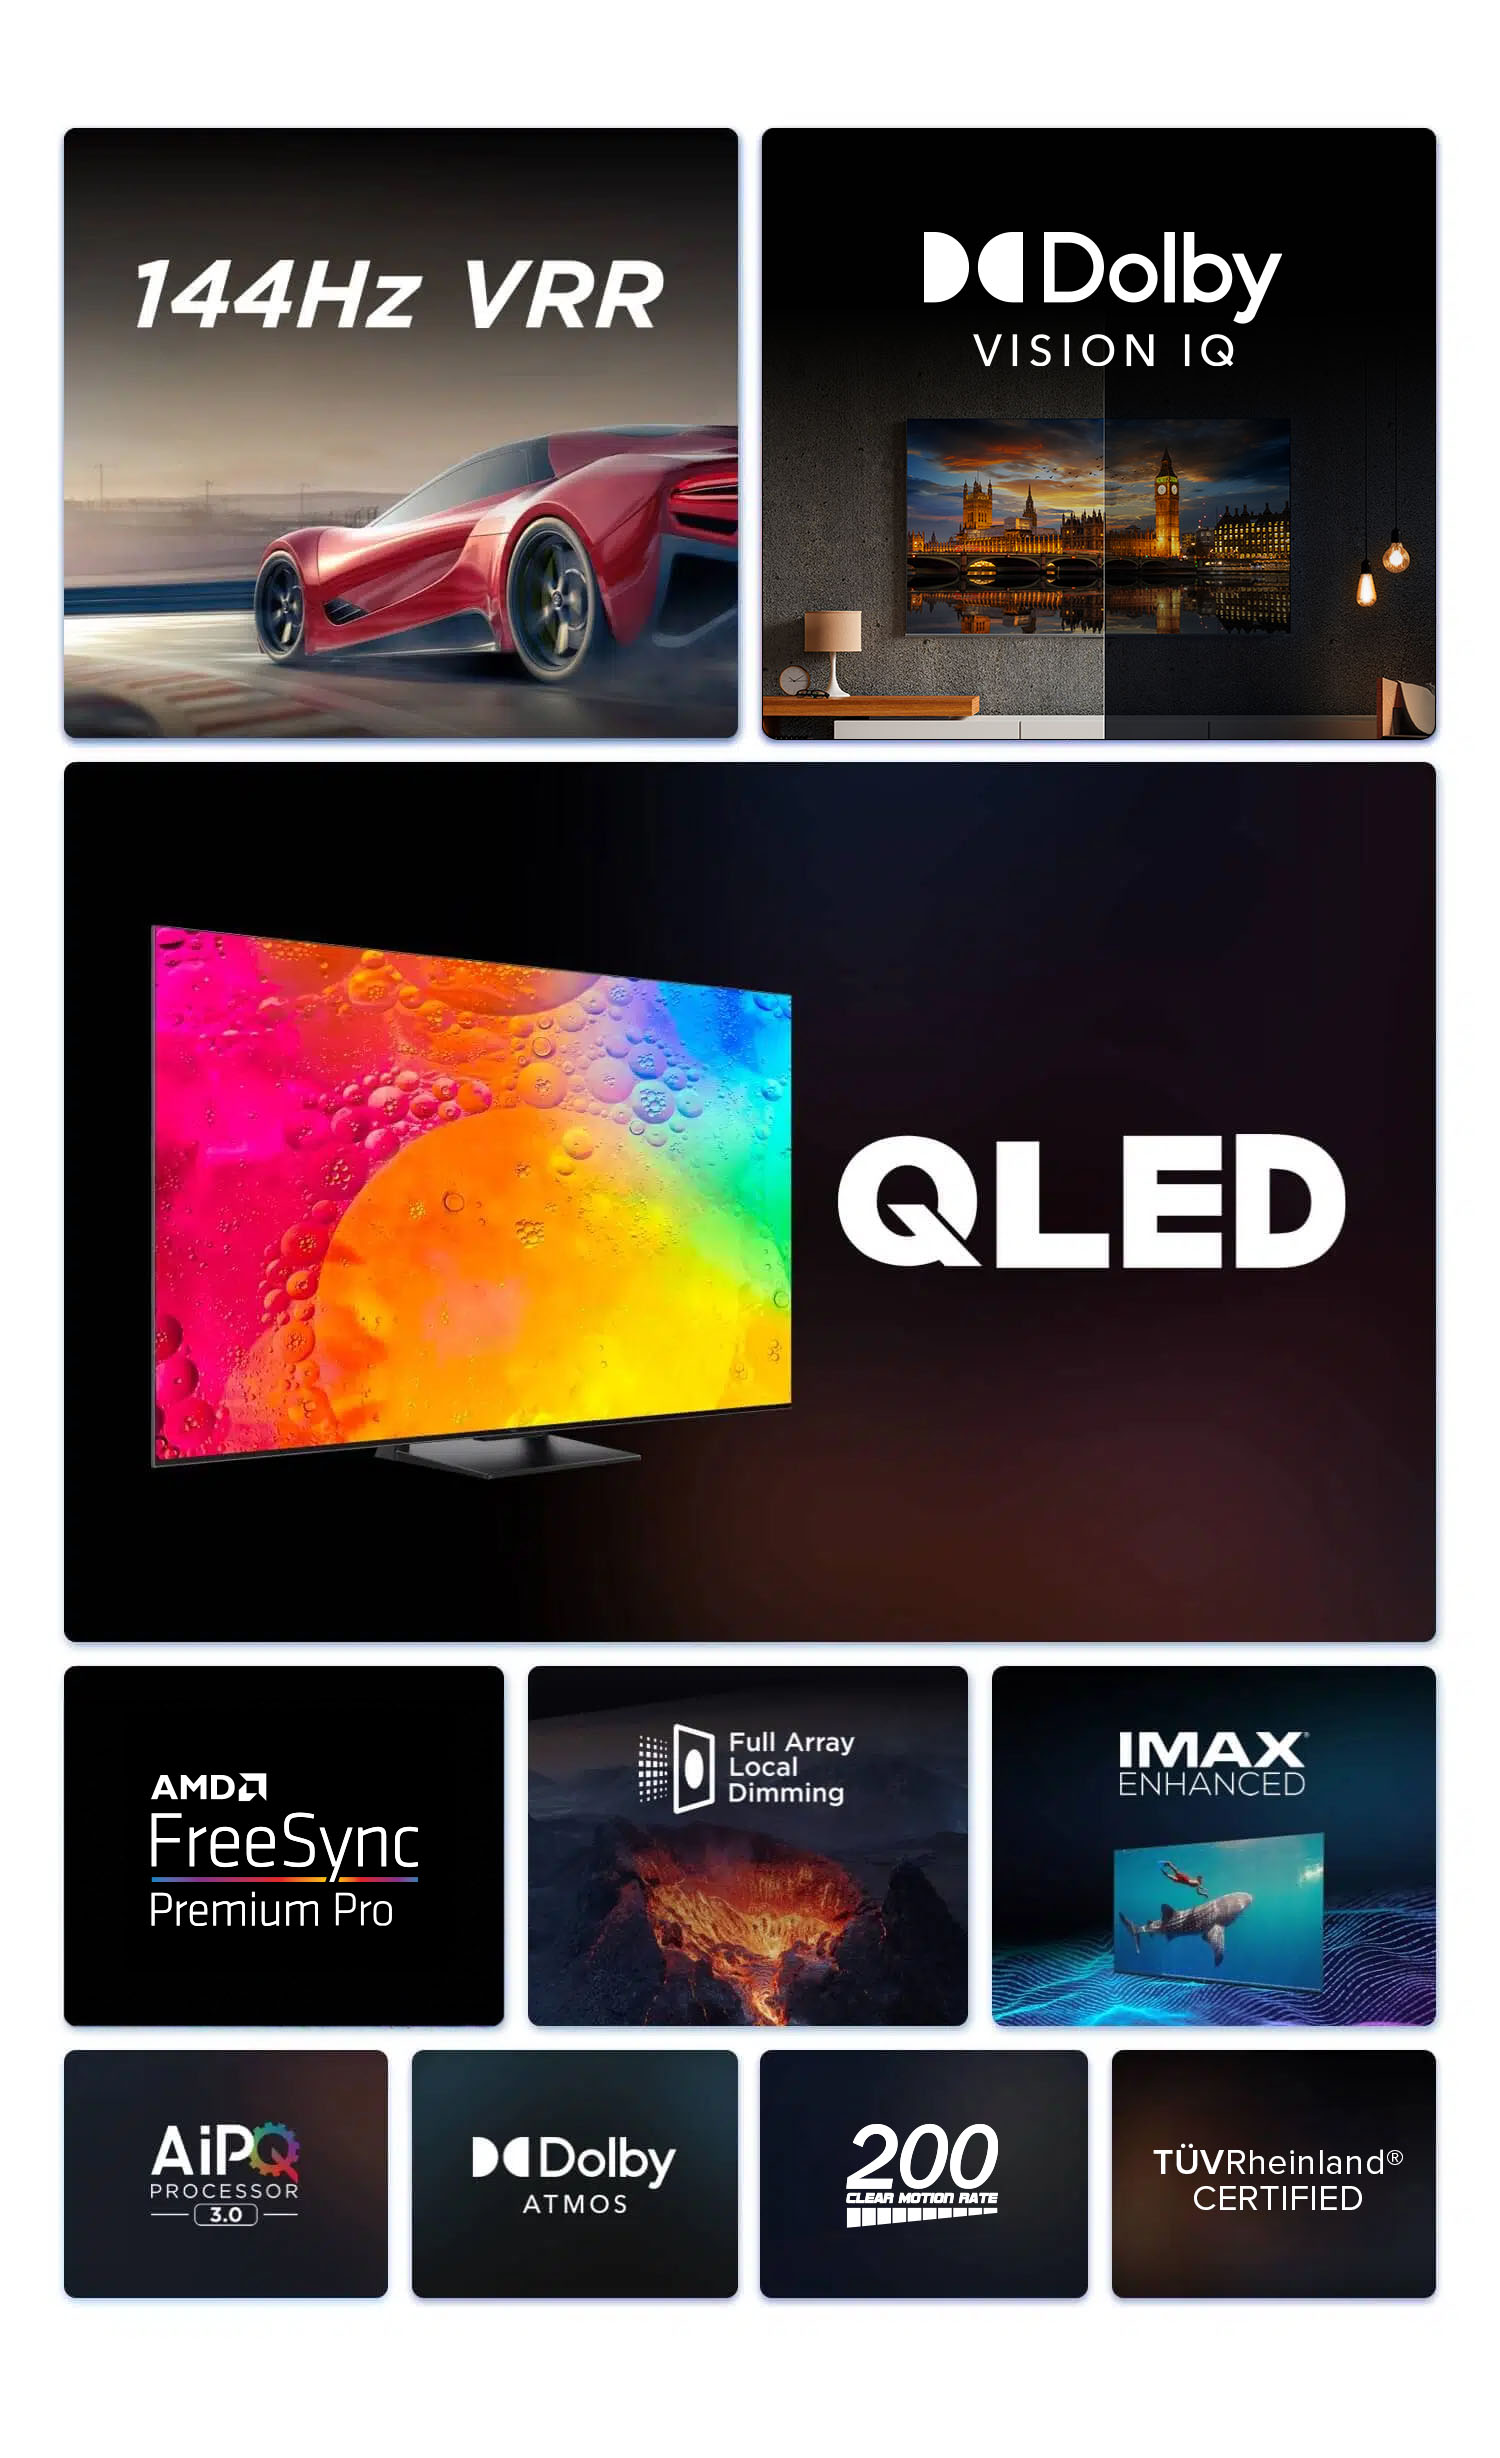 TCL C745 Series 85 QLED Gaming Smart TV 85C745 - Buy Online with